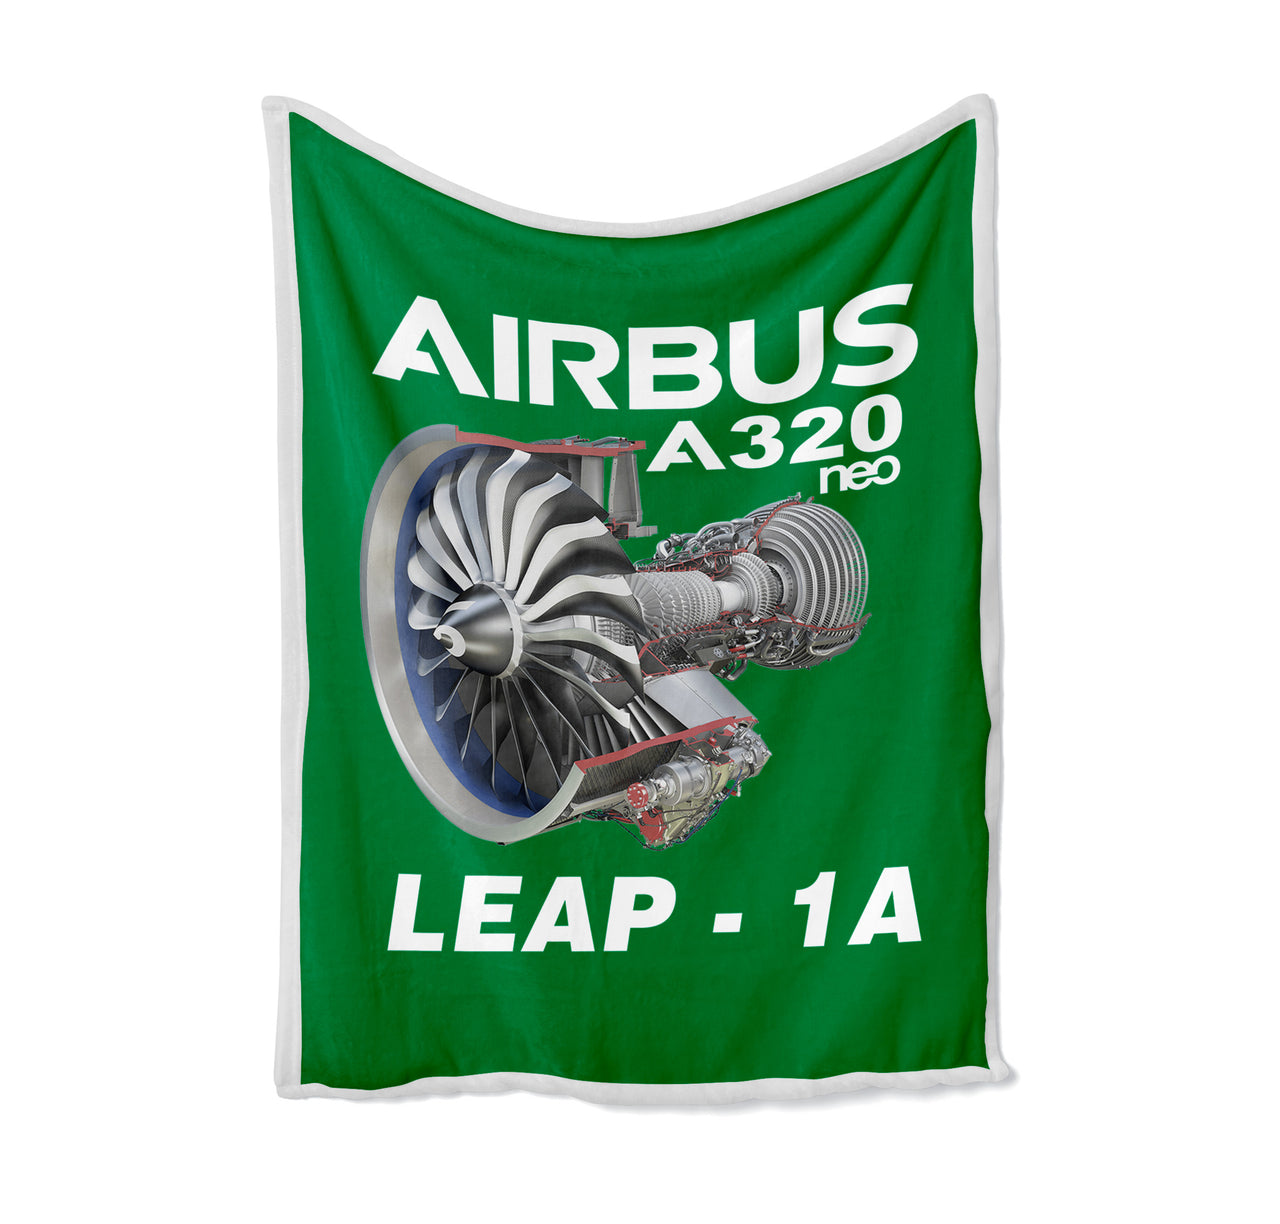 Airbus A320neo & Leap 1A Designed Bed Blankets & Covers